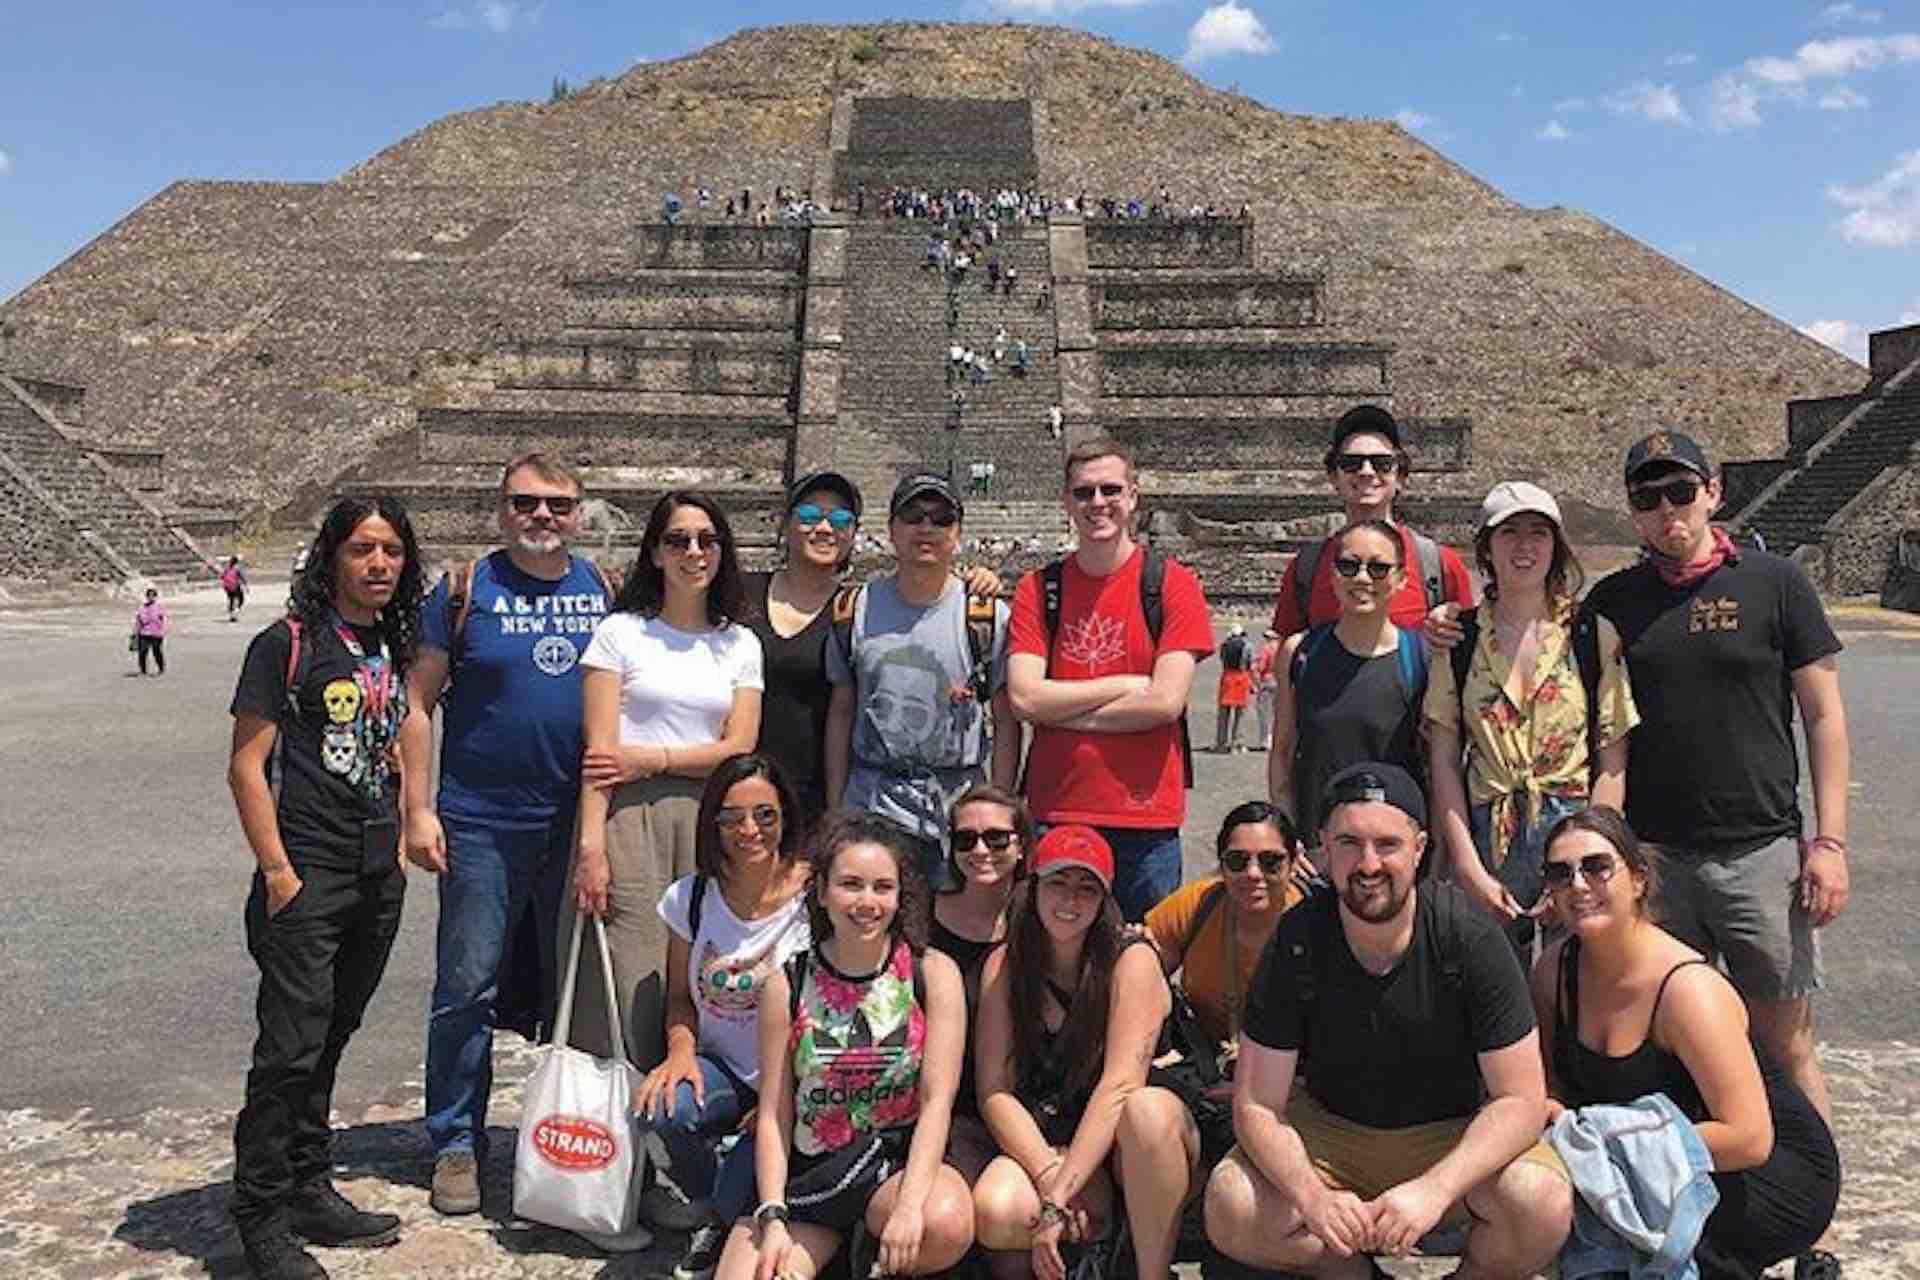 Teotihuacán Pyramids visitor group photo in front of Sun pyramid during tour